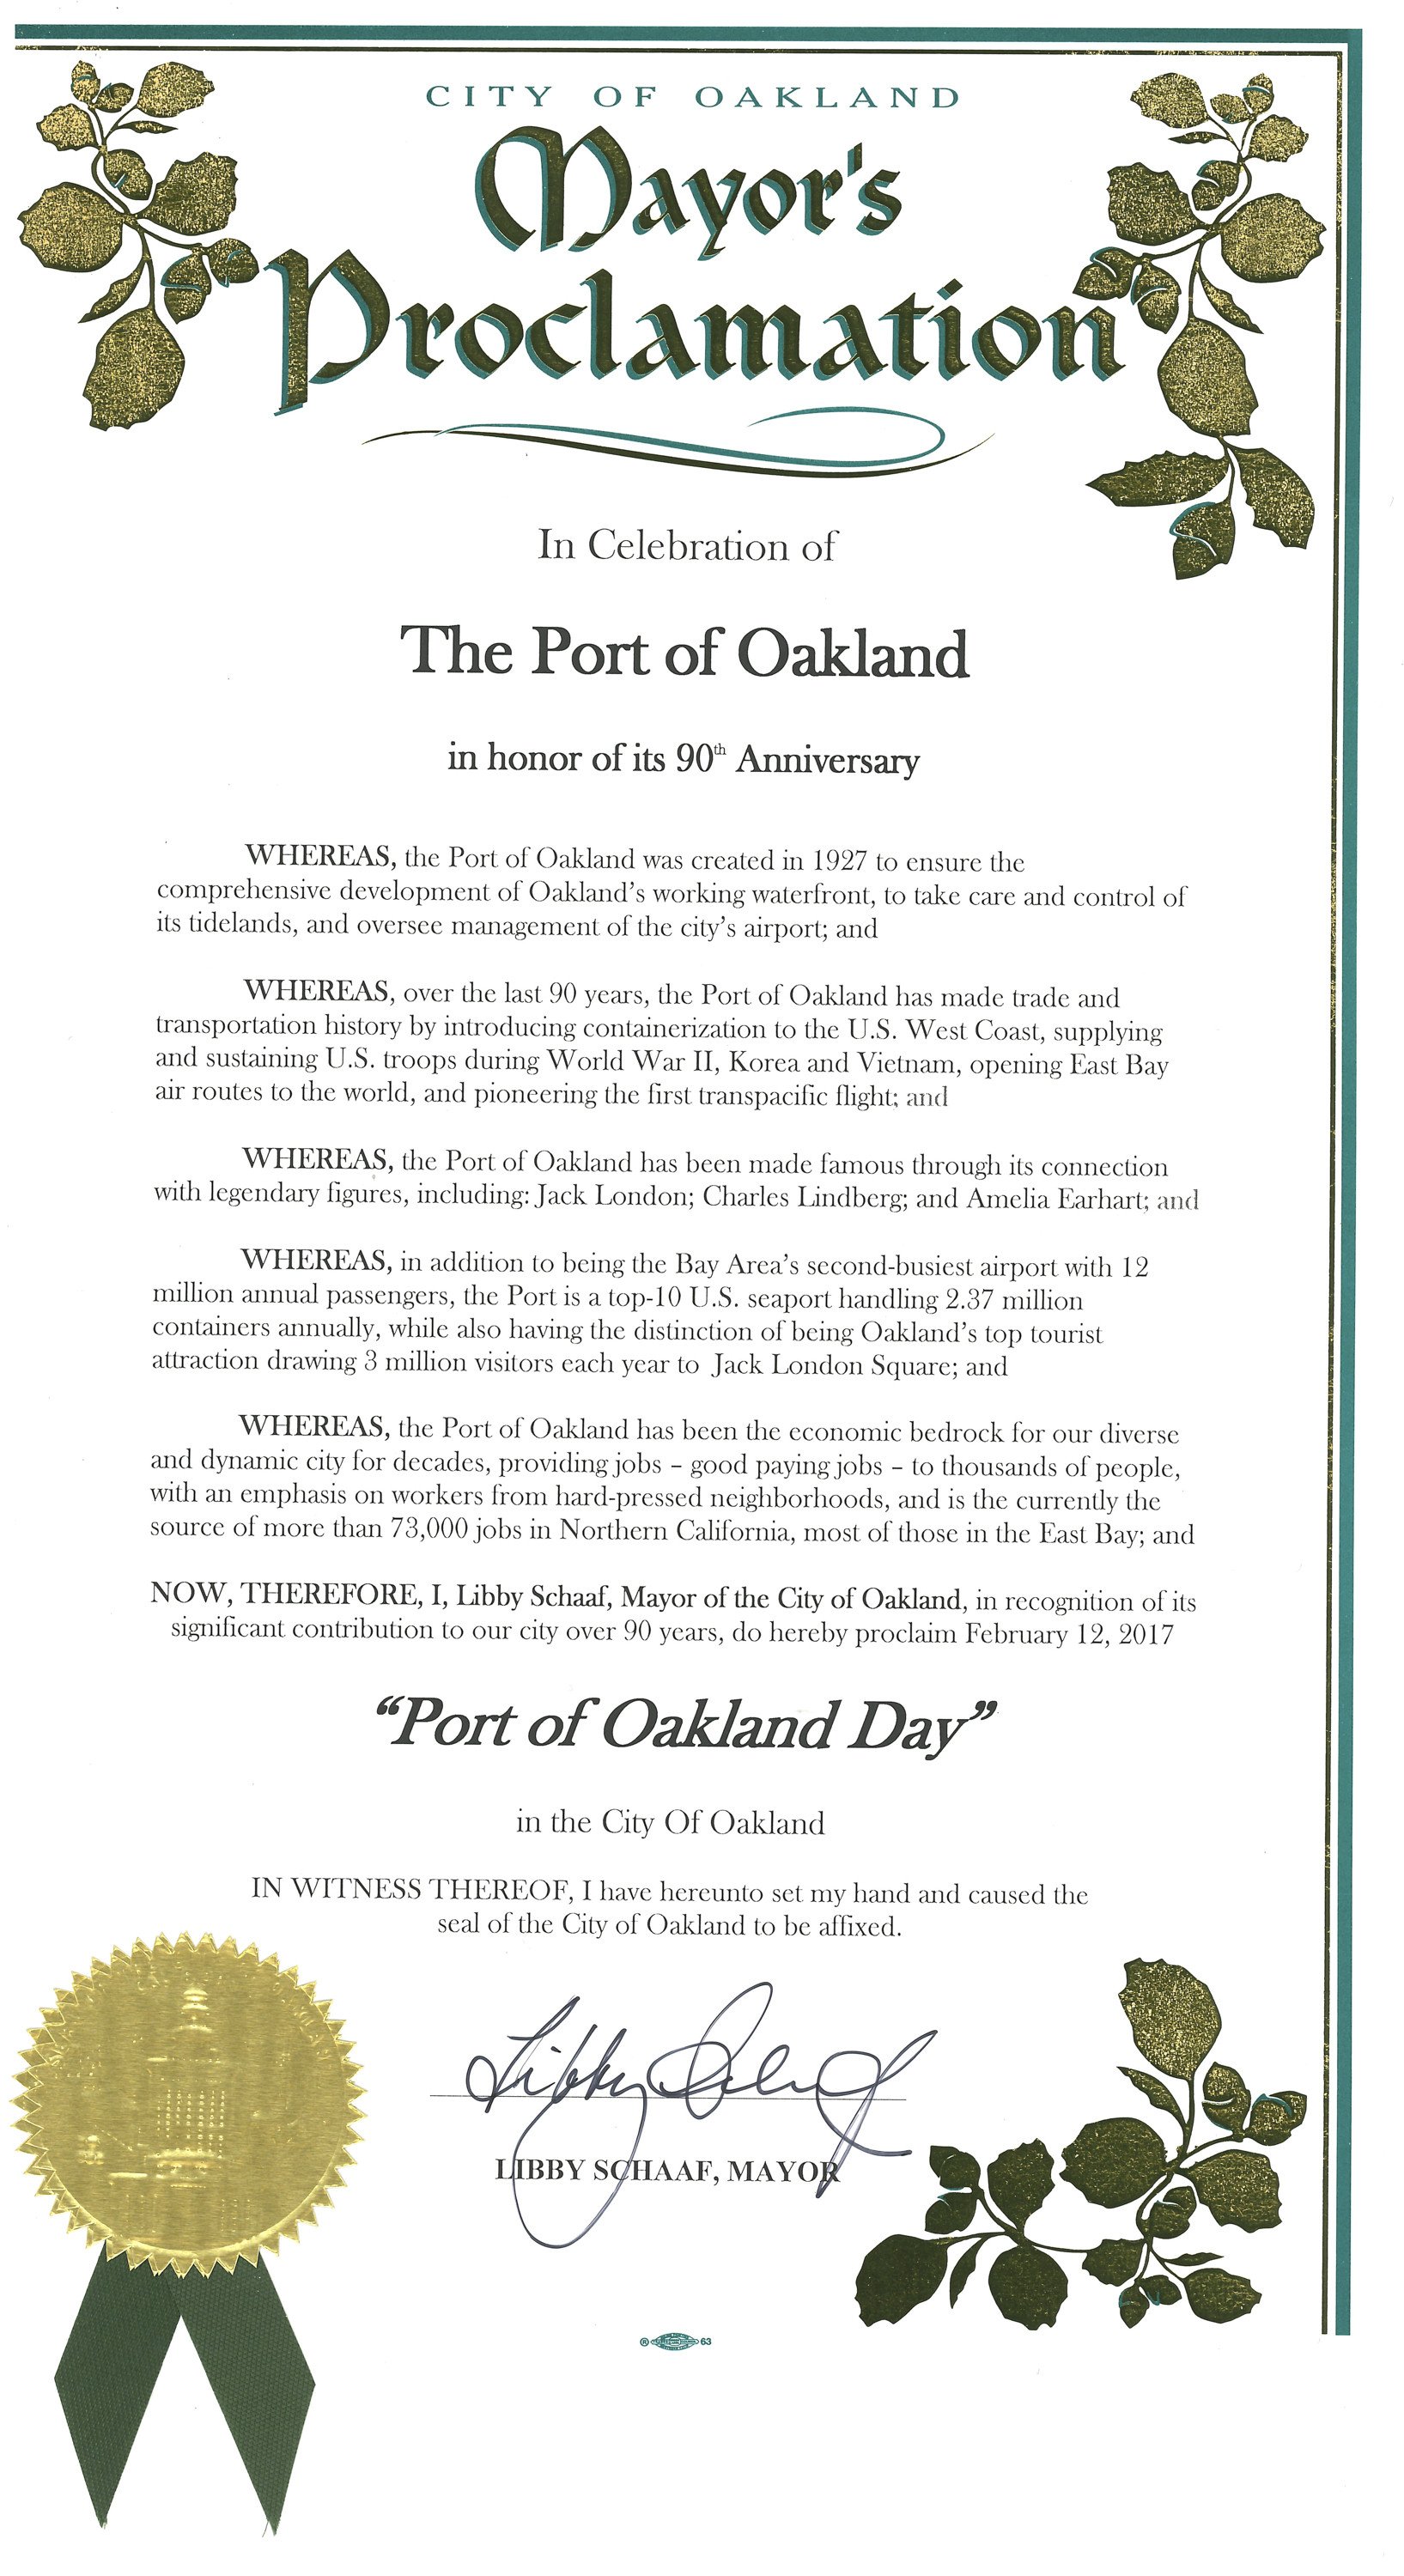 Mayoral Proclamation Template Proclamation by Oakland Mayor Libby Schaaf